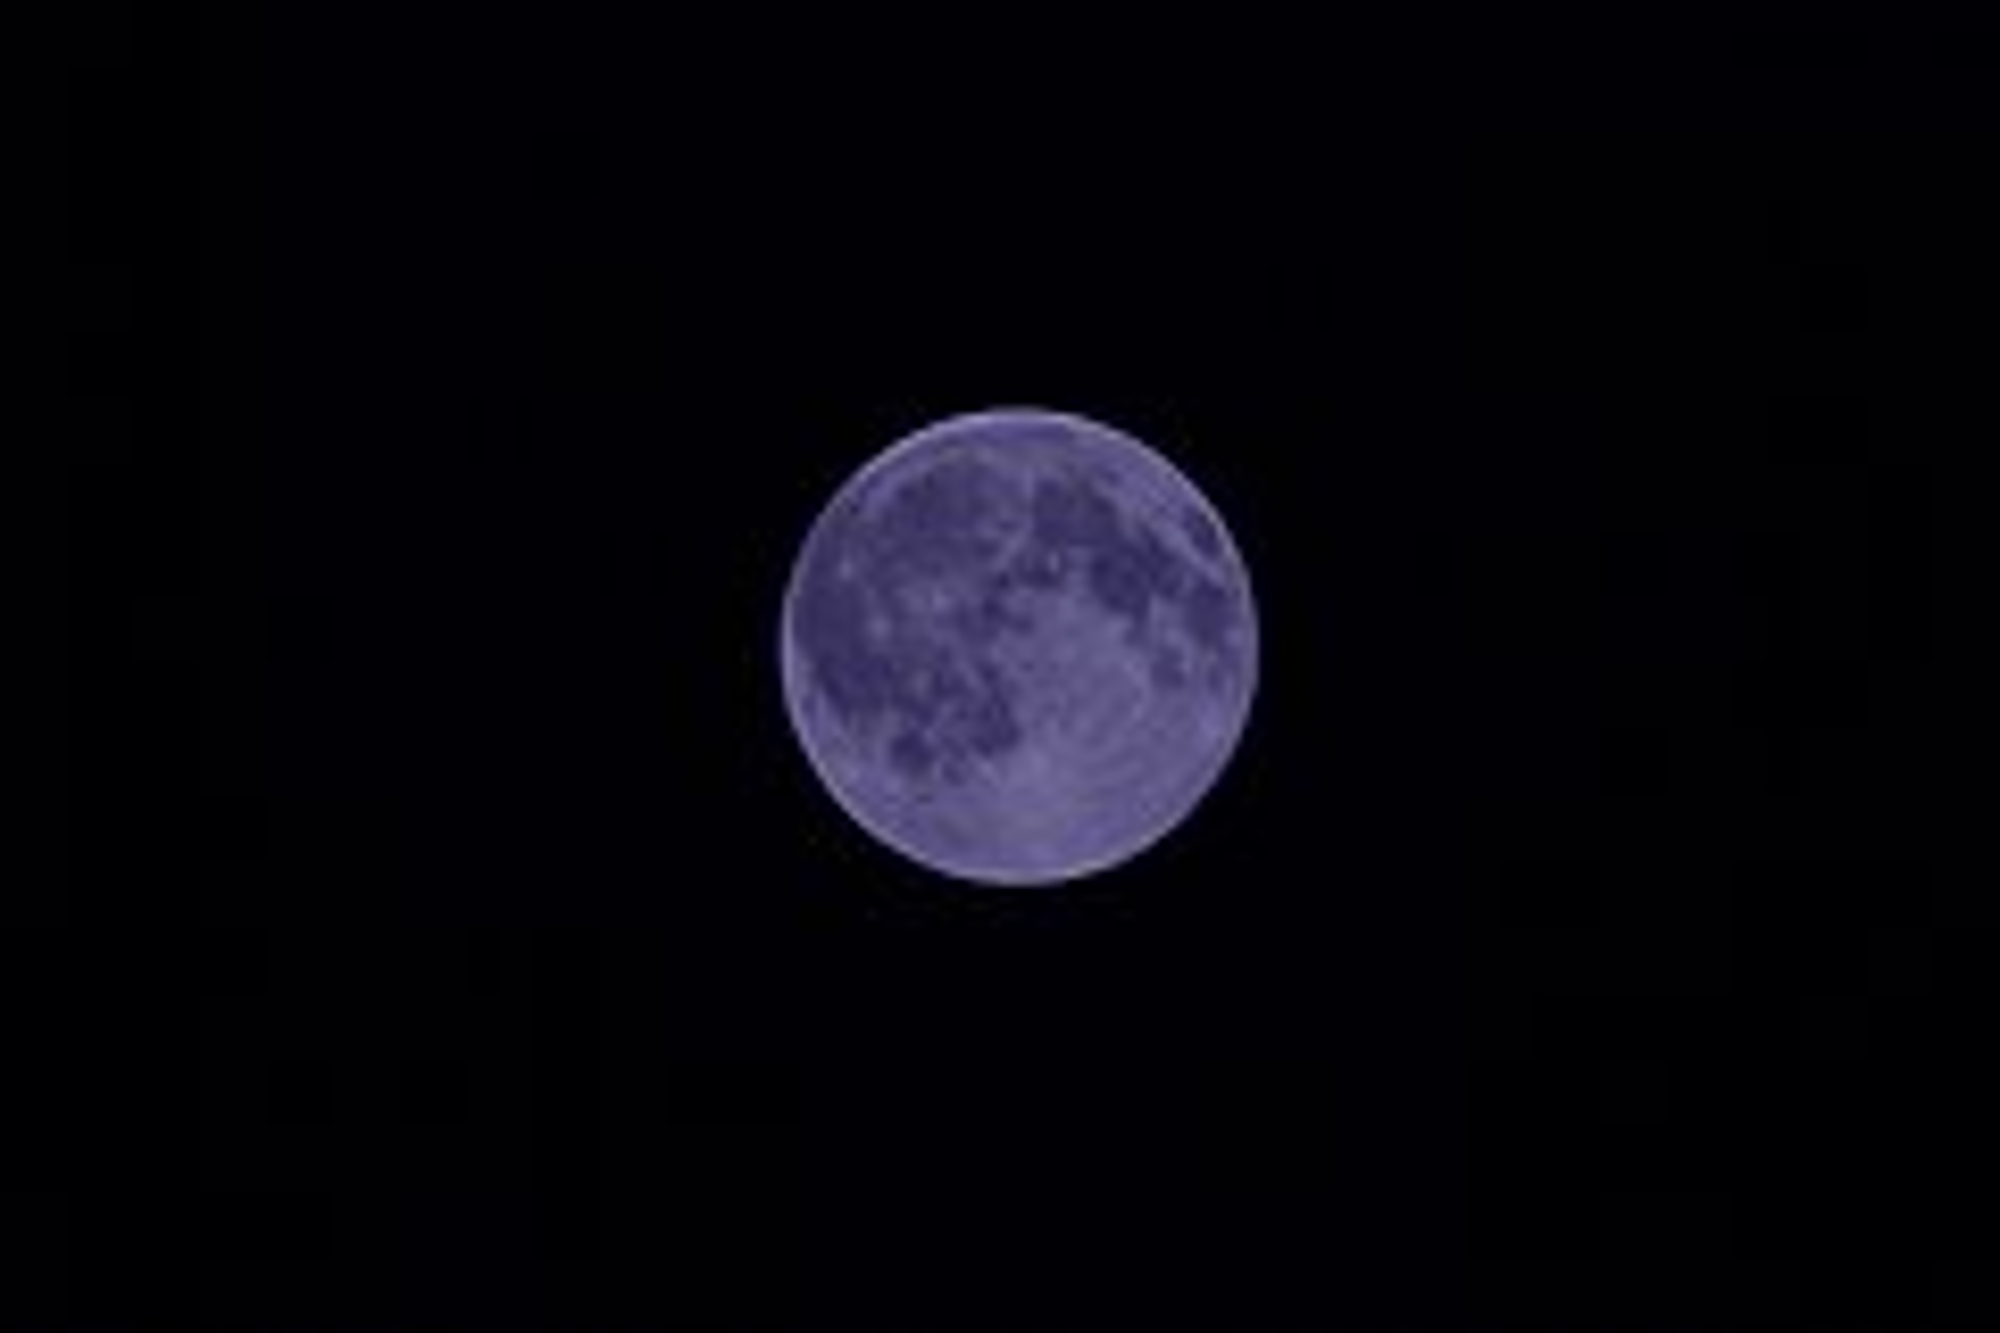 A BLUE MOON lights up the night sky in one of its rare occurrences. While the moon does look blue in color, it is actually due to a persons optics and how one perceives color and light.